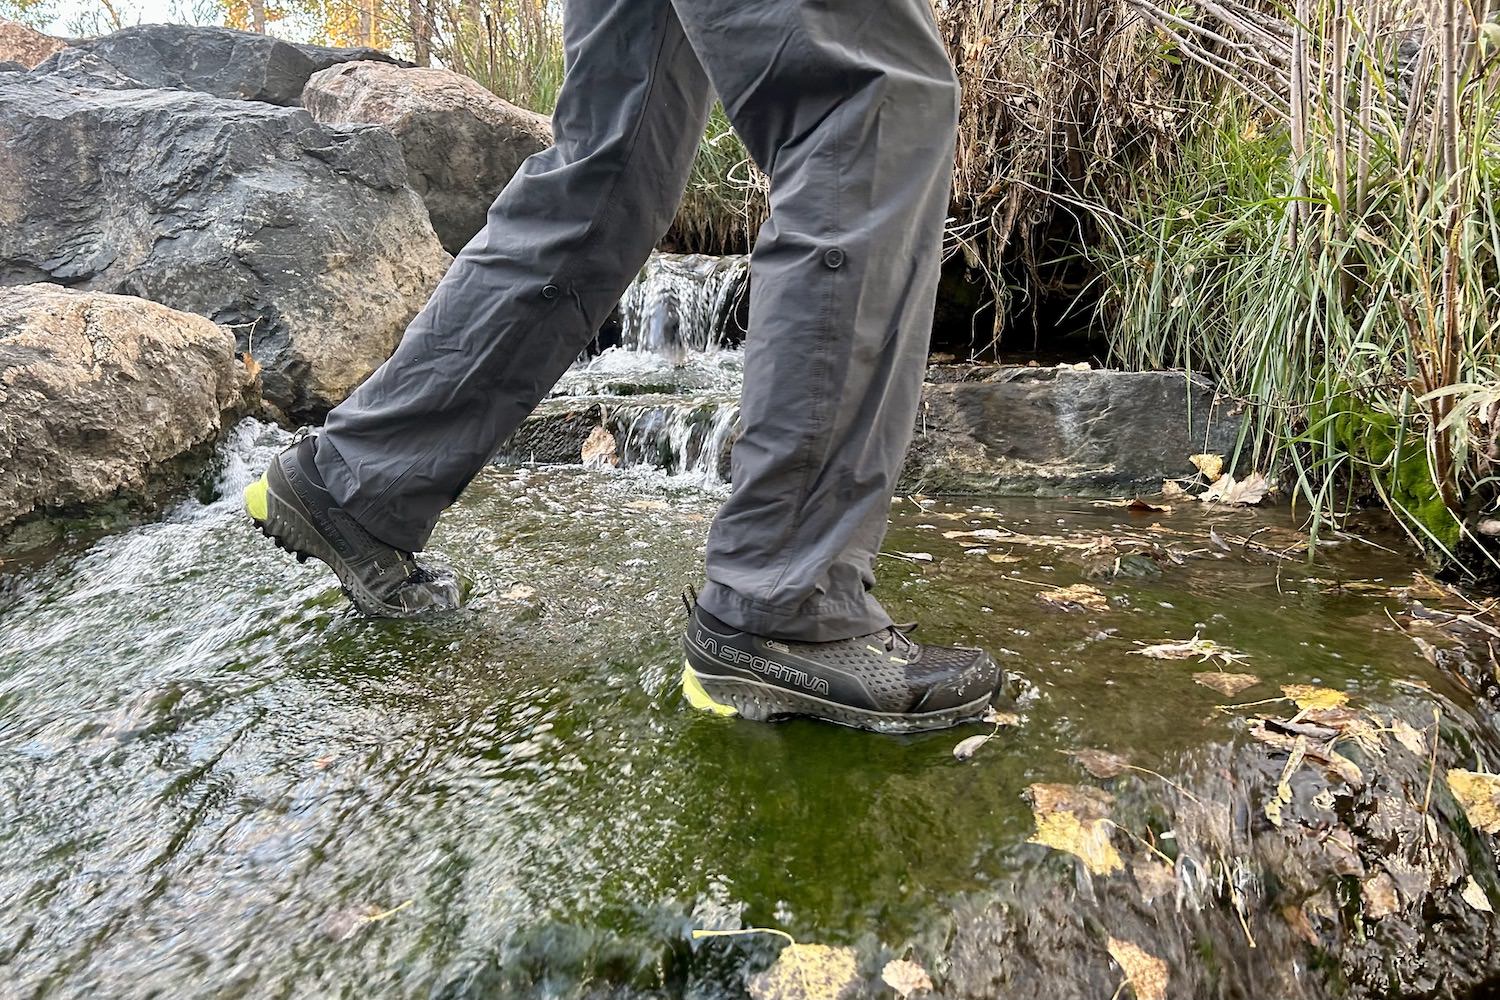 The lower half of a hiker crossing a flowing creek in the La Sportiva Spire GTX shoes